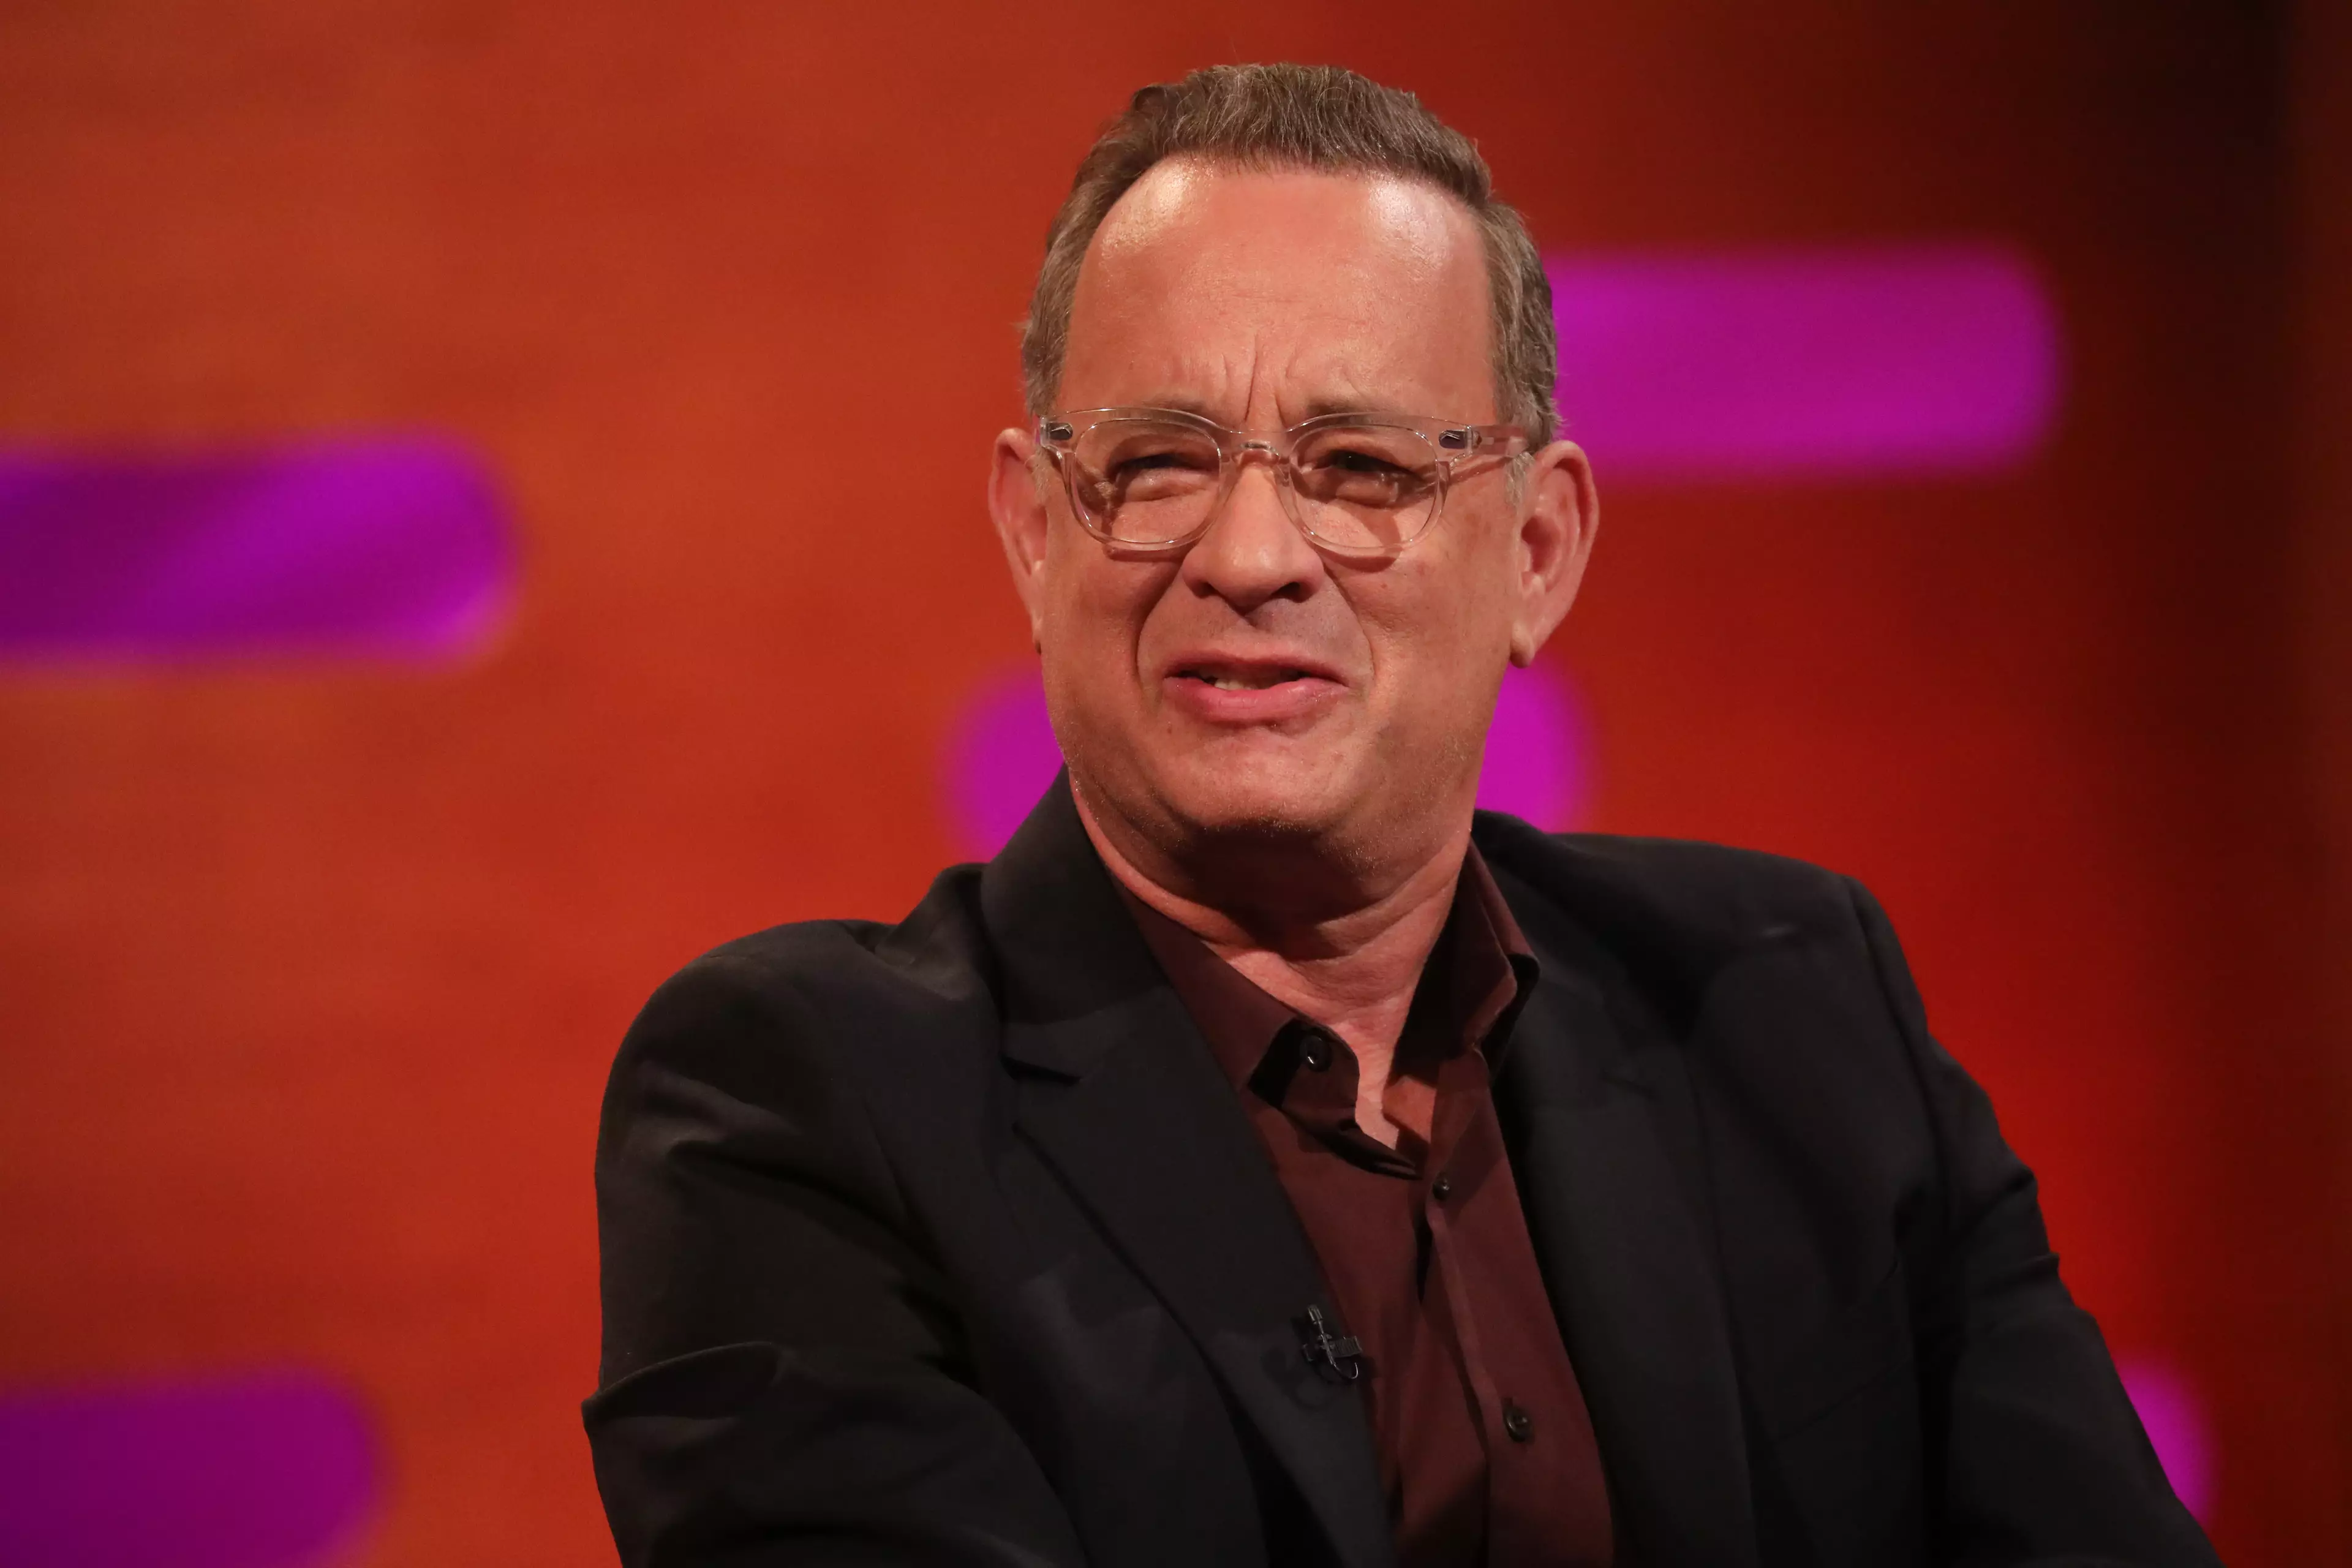 Tom Hanks will be ringing in the new year with Graham Norton and guests.